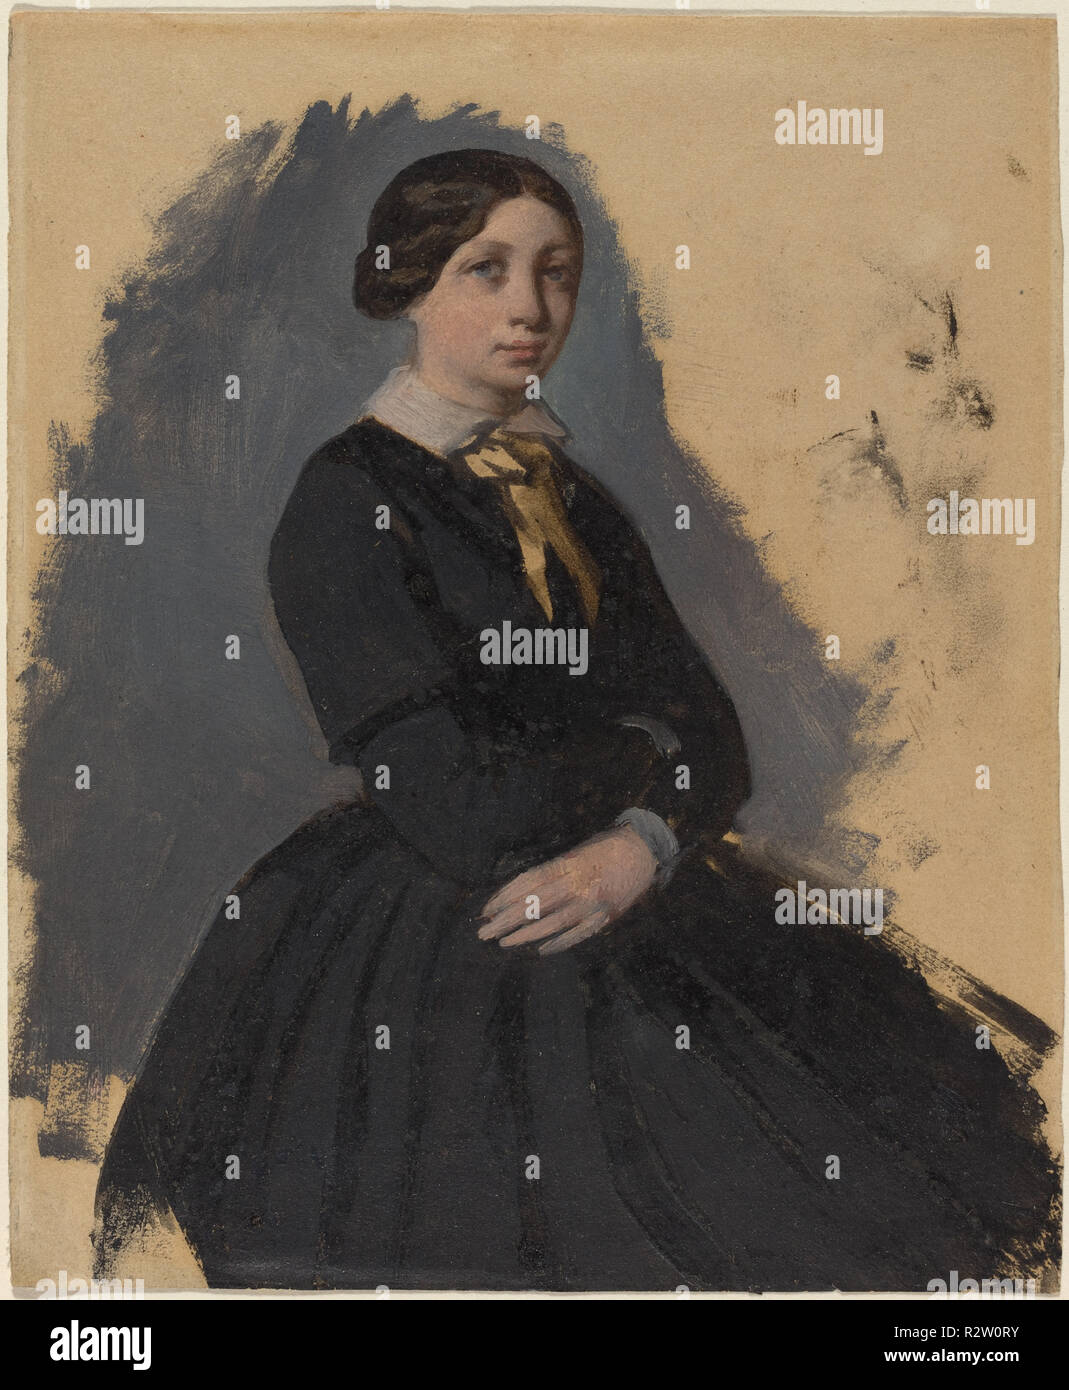 Young Woman in Black. Dated: 1861/1865. Dimensions: overall: 15.5 x 12.8 cm (6 1/8 x 5 1/16 in.). Medium: oil on wove paper. Museum: National Gallery of Art, Washington DC. Author: EDGAR DEGAS. Stock Photo